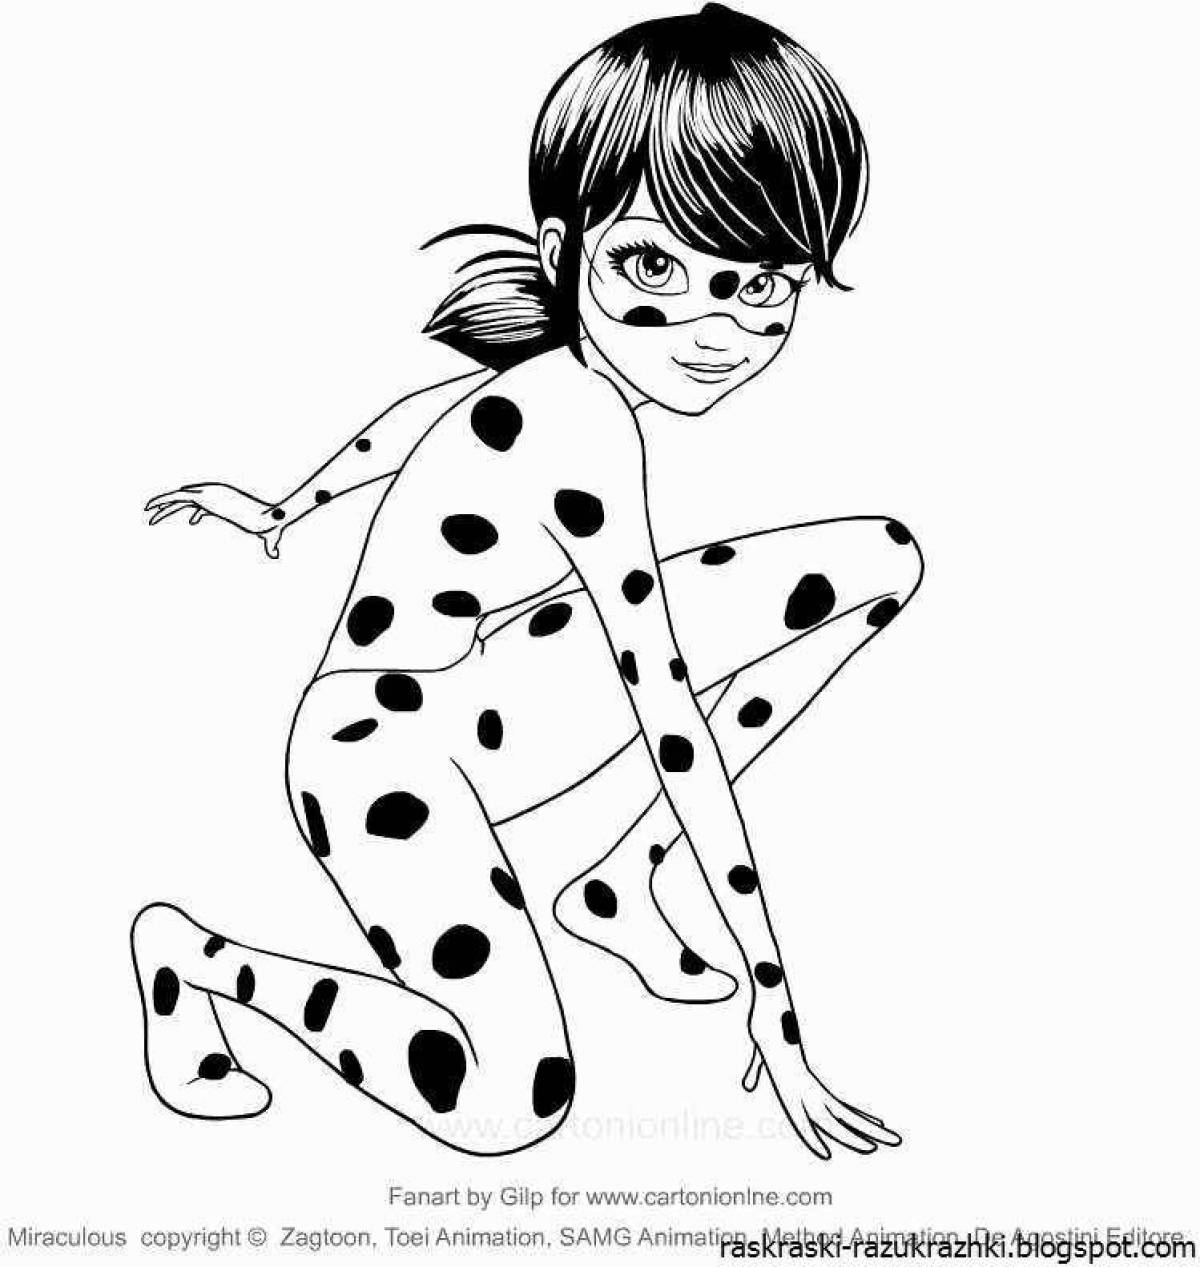 Pretty lady bug coloring page